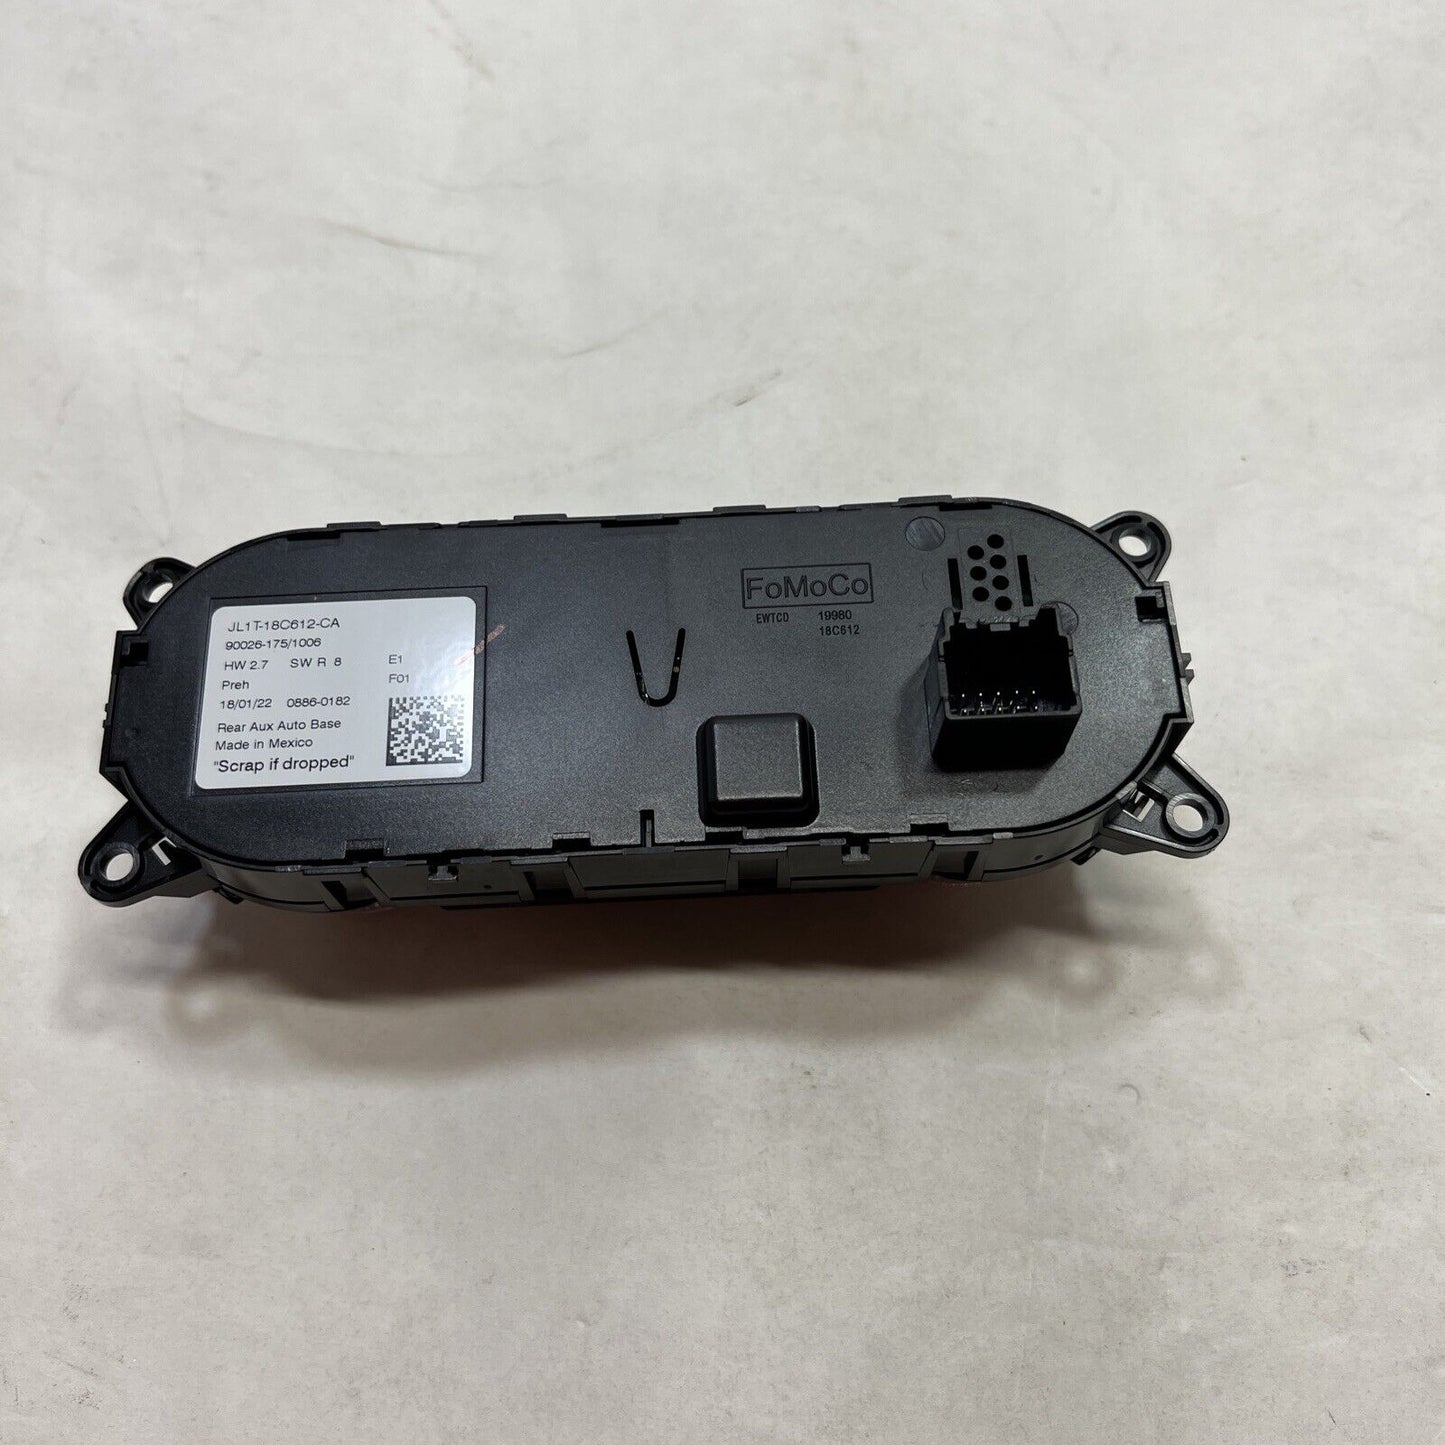 New OEM Ford A/C Climate Control Unit Expedition 2018-21 Motorcraft CCM218